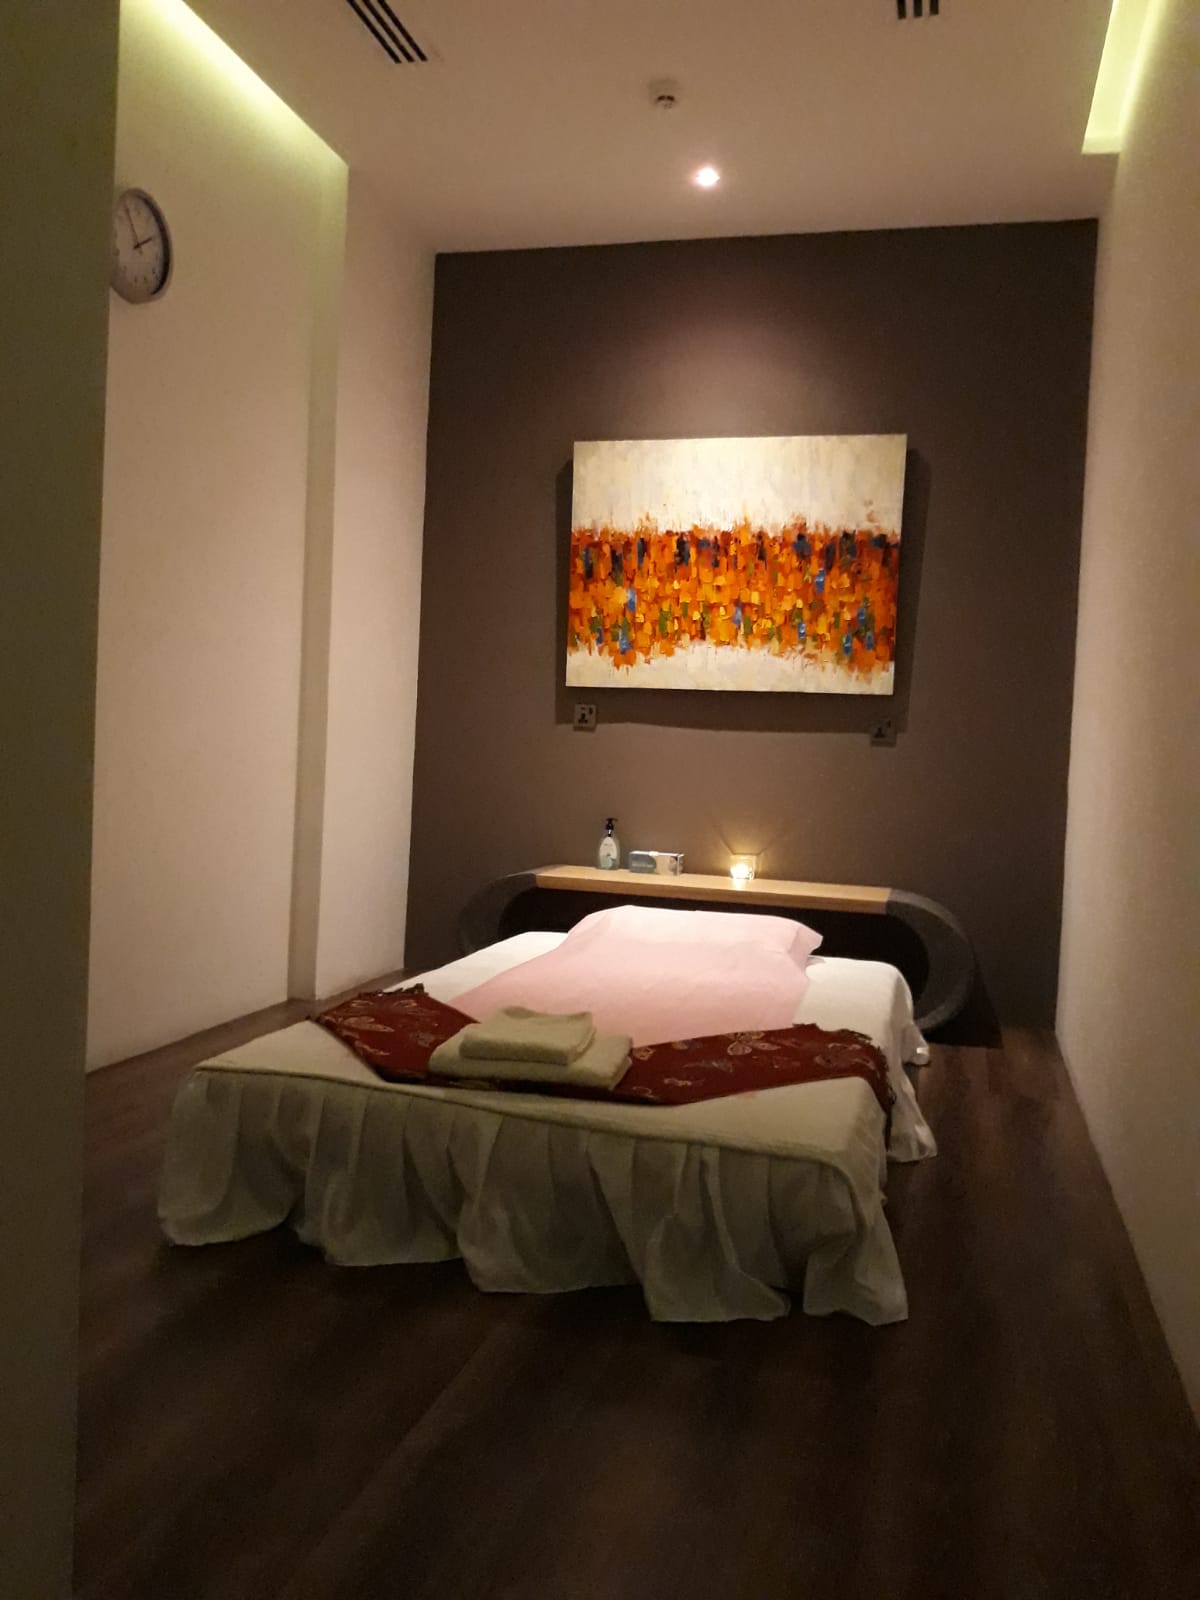 Photograph of massage therapy room with low massage bed